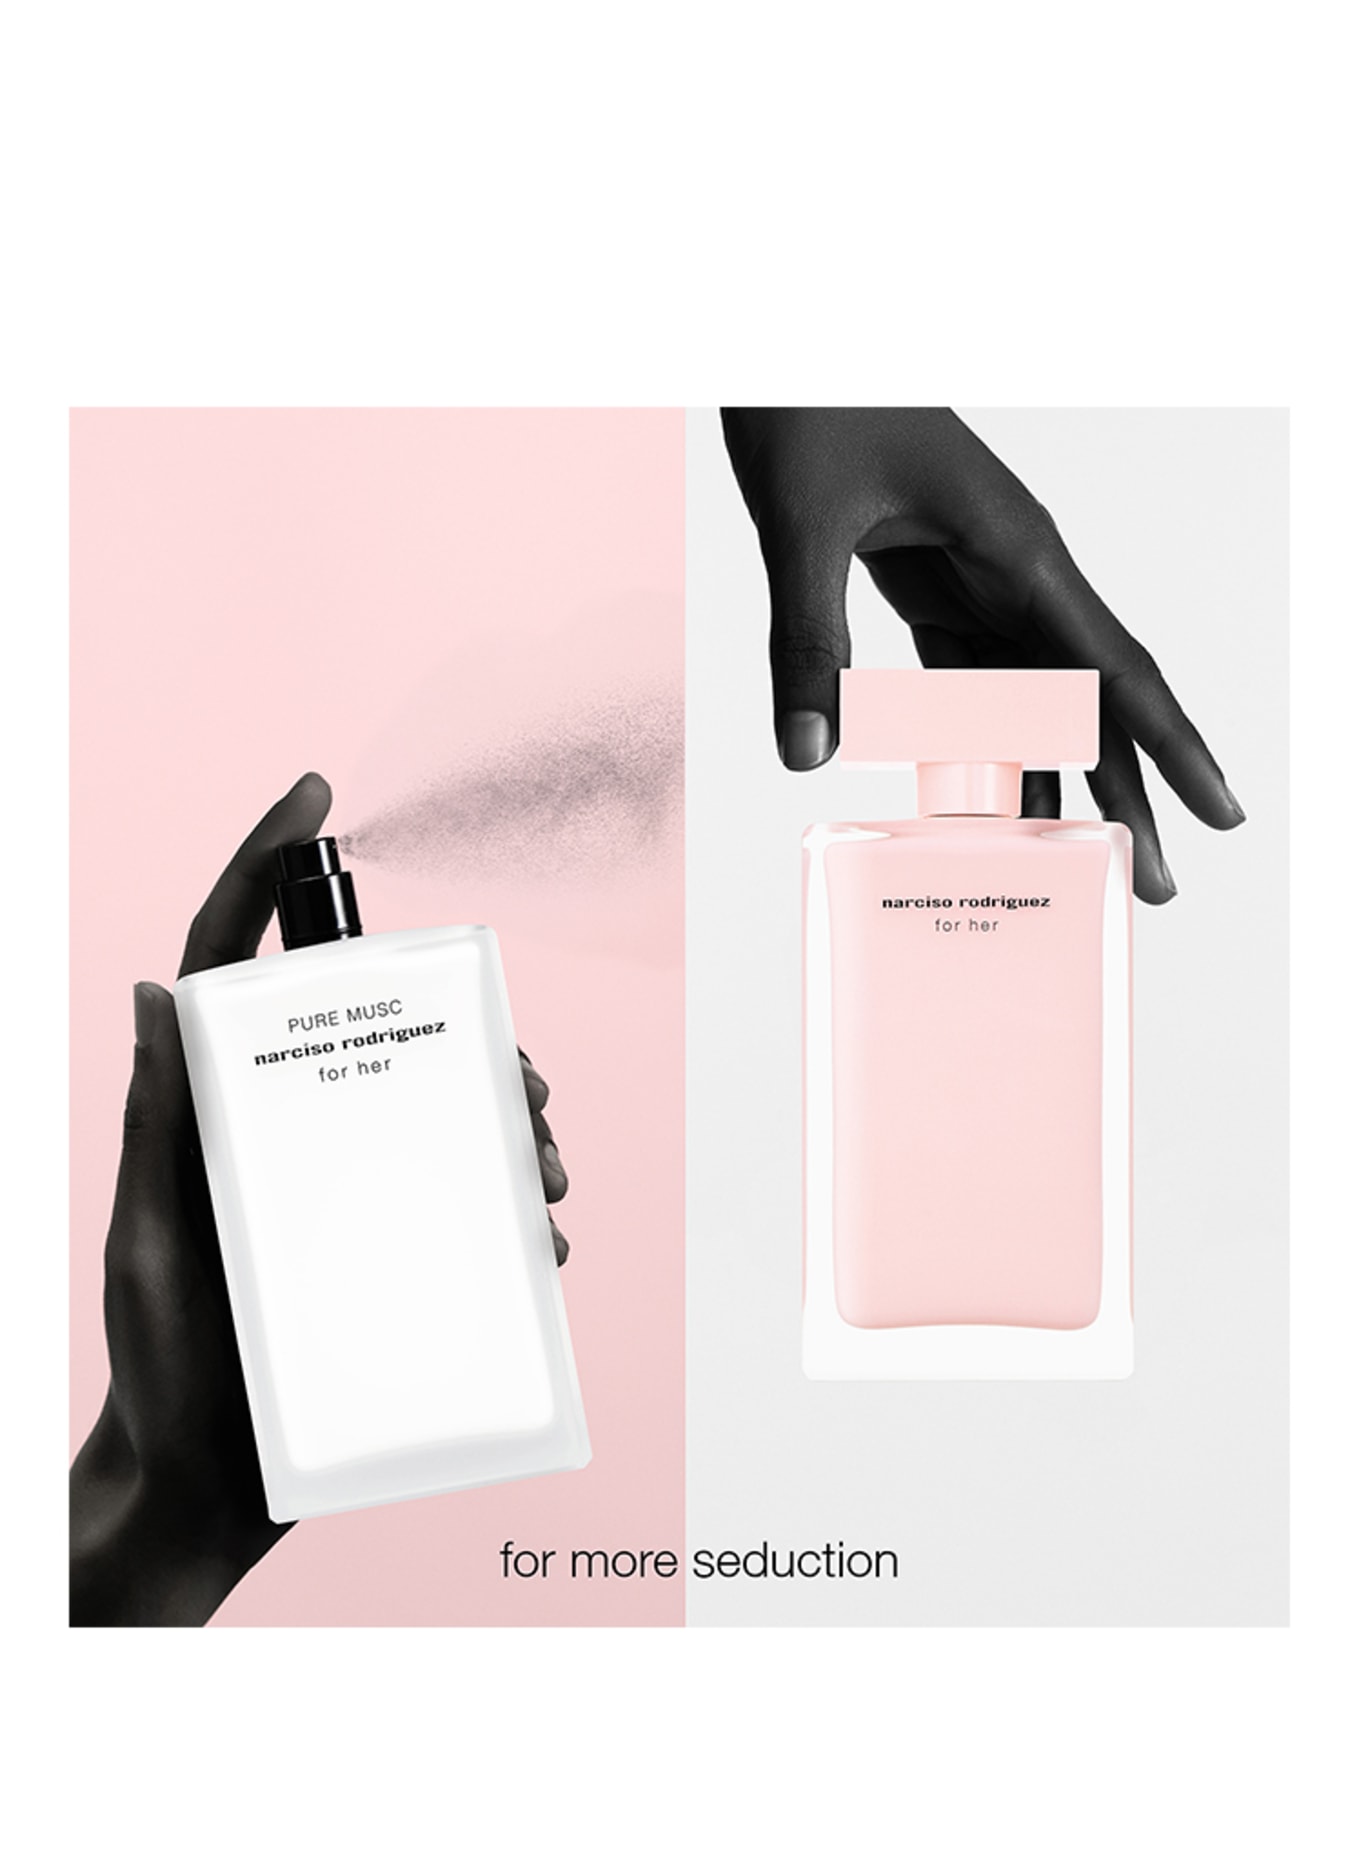 narciso rodriguez FOR HER PURE MUSC (Obrazek 5)